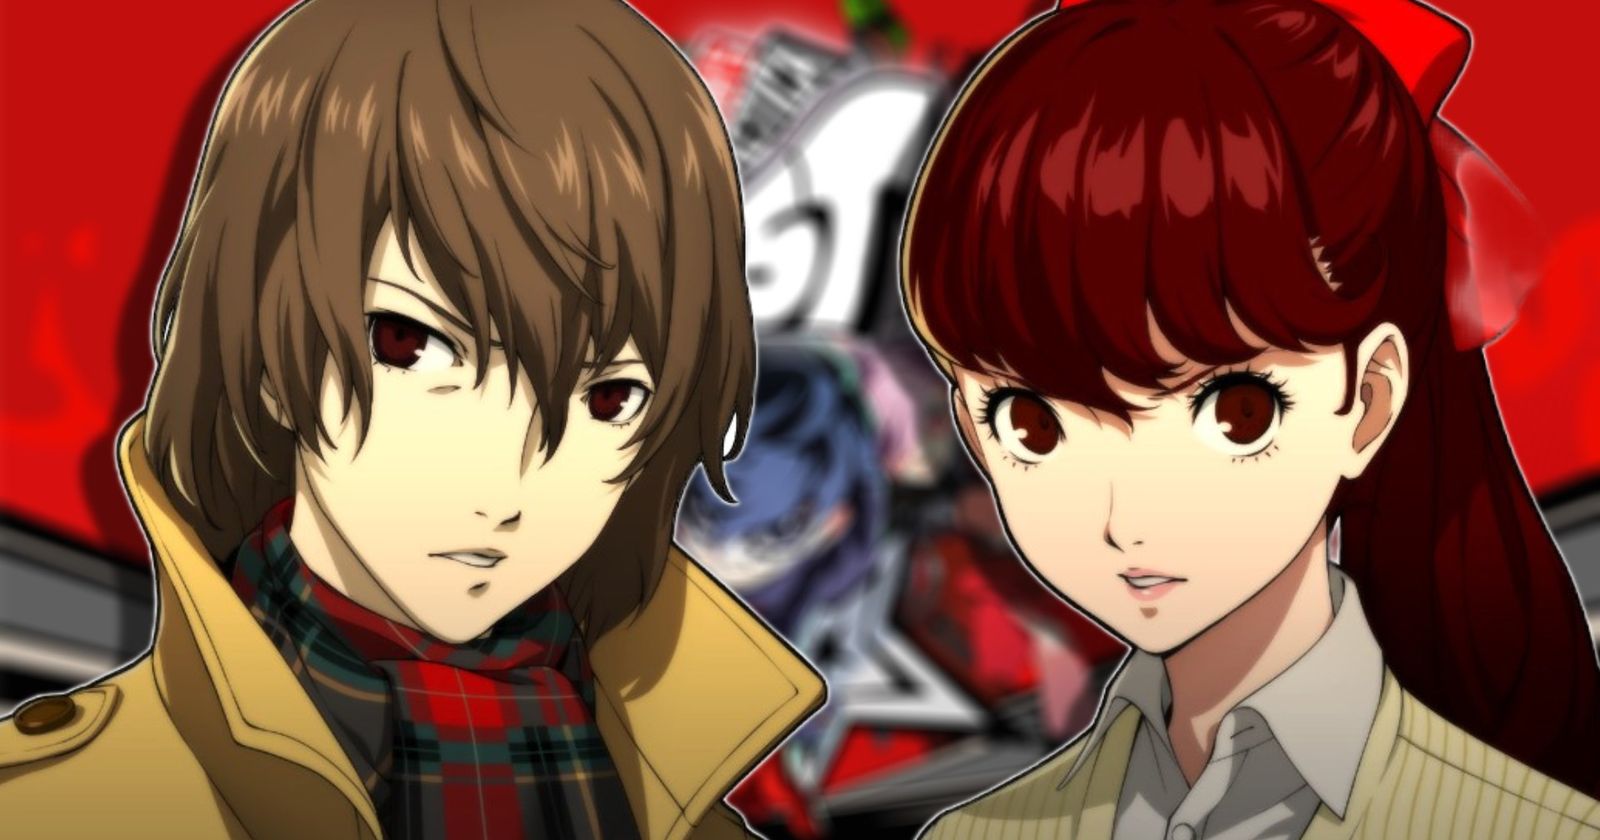 New Persona 5 Tactica Trailer Shows Akechi and Kasumi DLC - Crunchyroll News